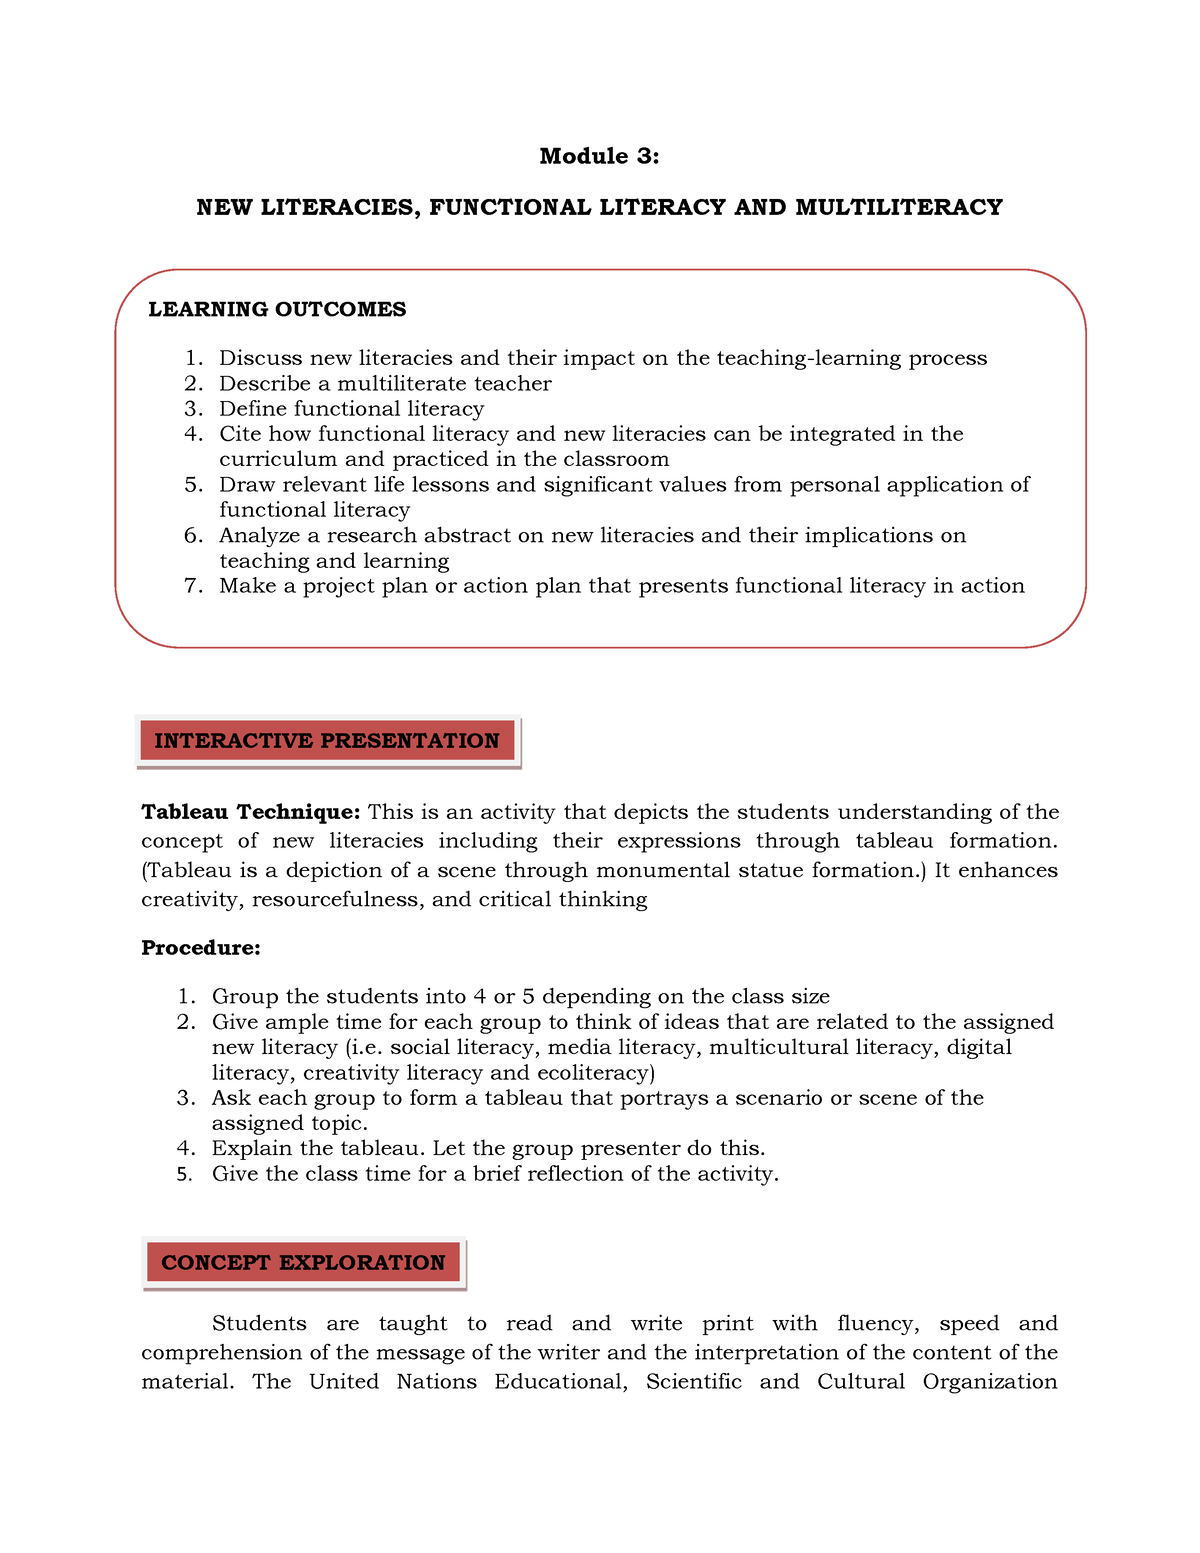 new literacies functional literacy and multiliteracy essay